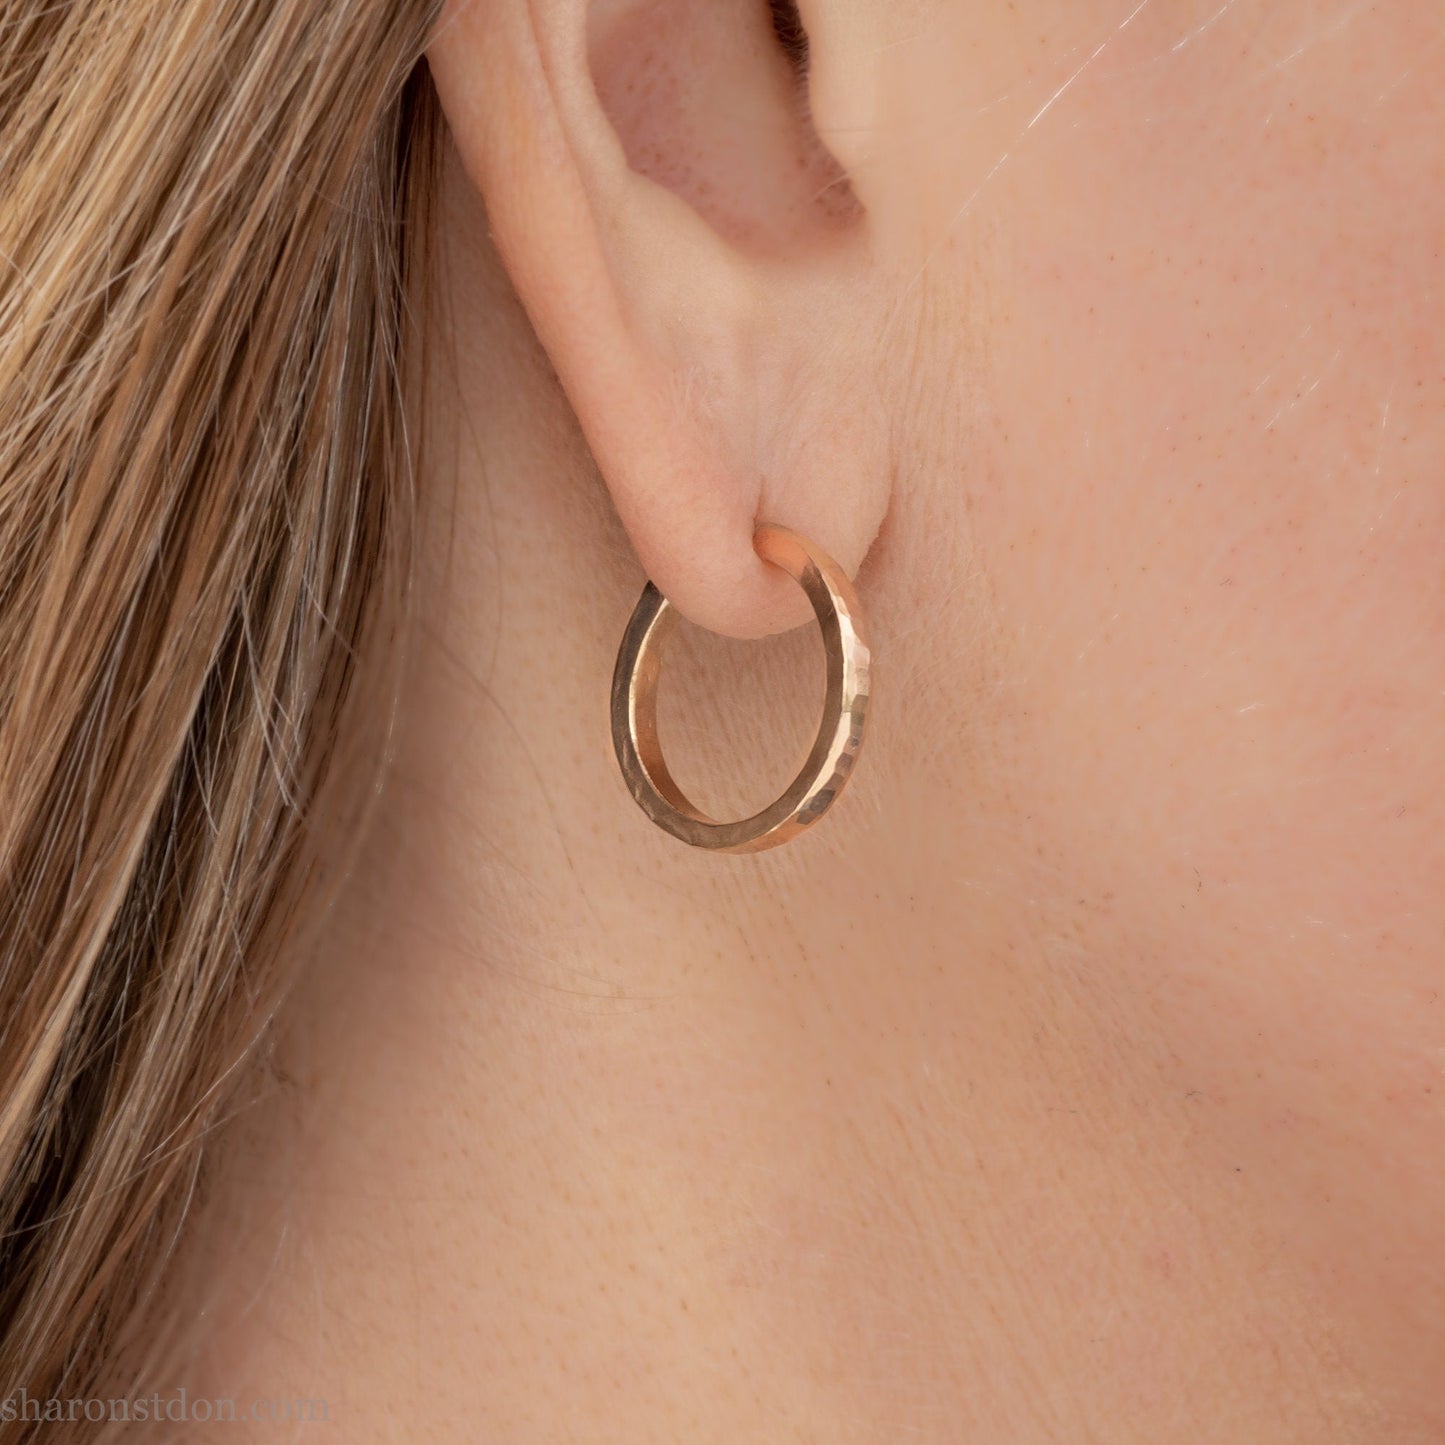 Solid 22k yellow gold hoop earrings set, handmade in North America by Sharon SaintDon.18mm diameter round, 2mm wide, 1.5mm thick, with hammered texture and matte finish.